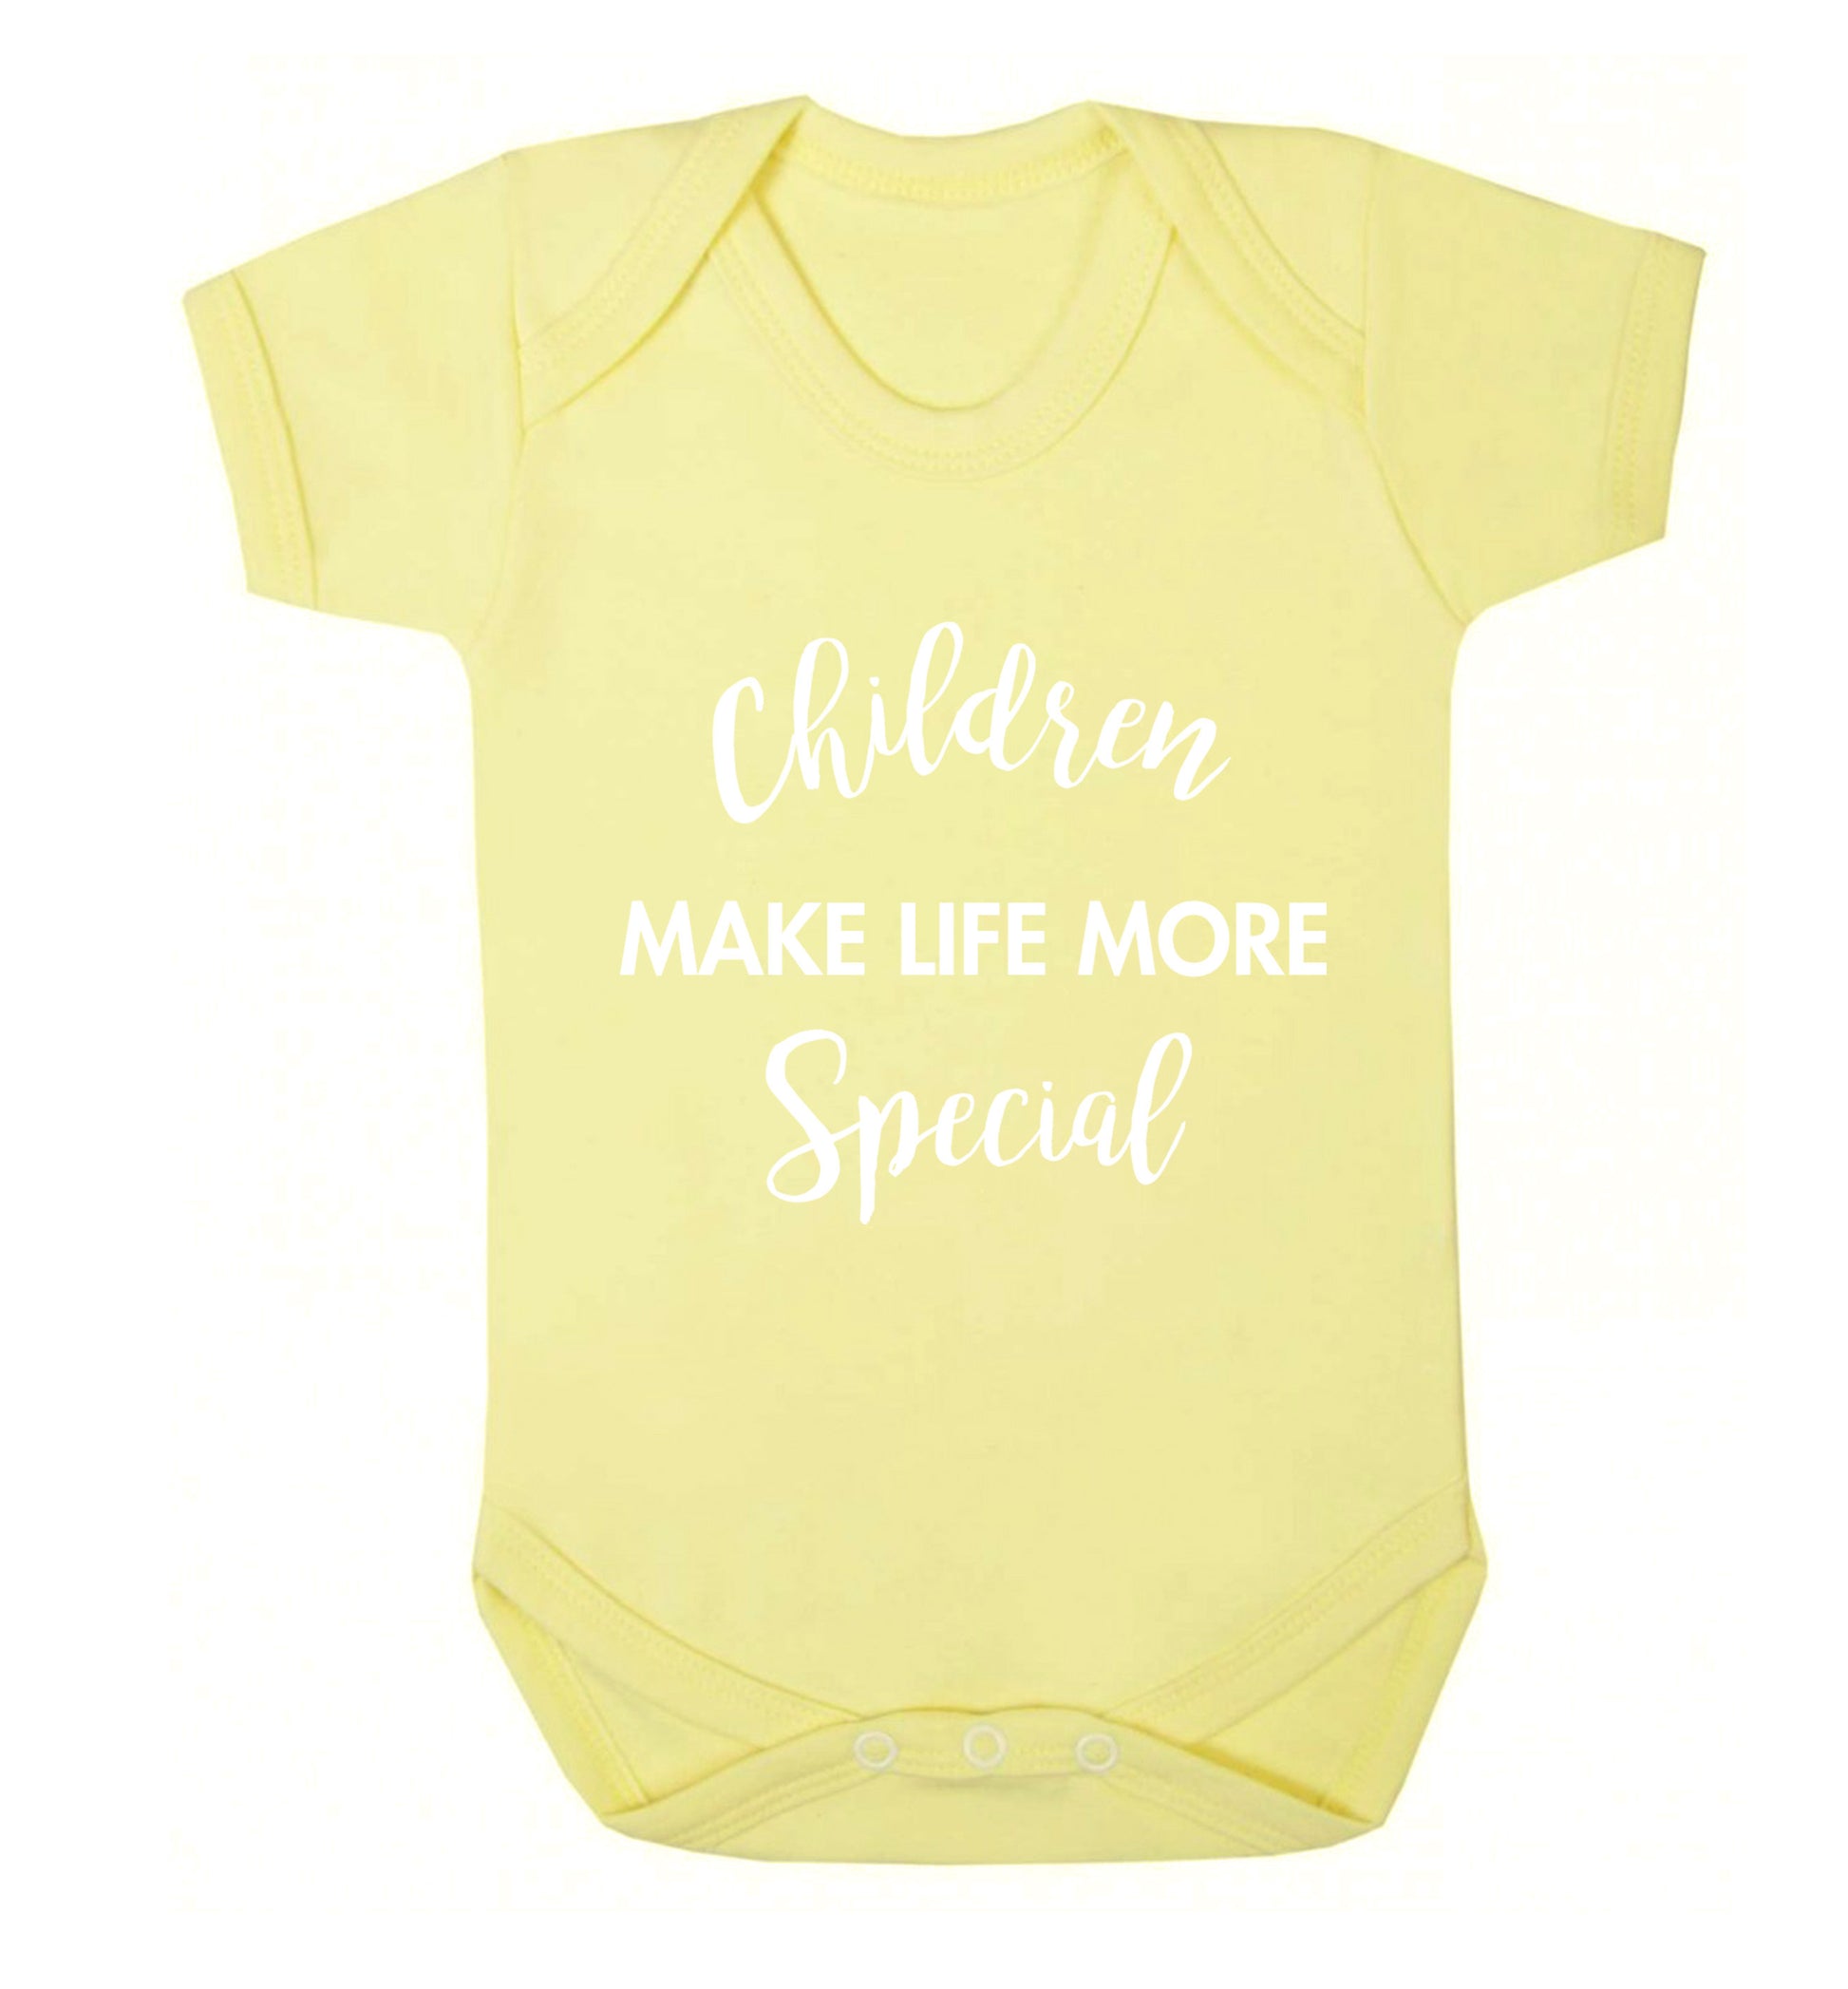 Children make life more special Baby Vest pale yellow 18-24 months